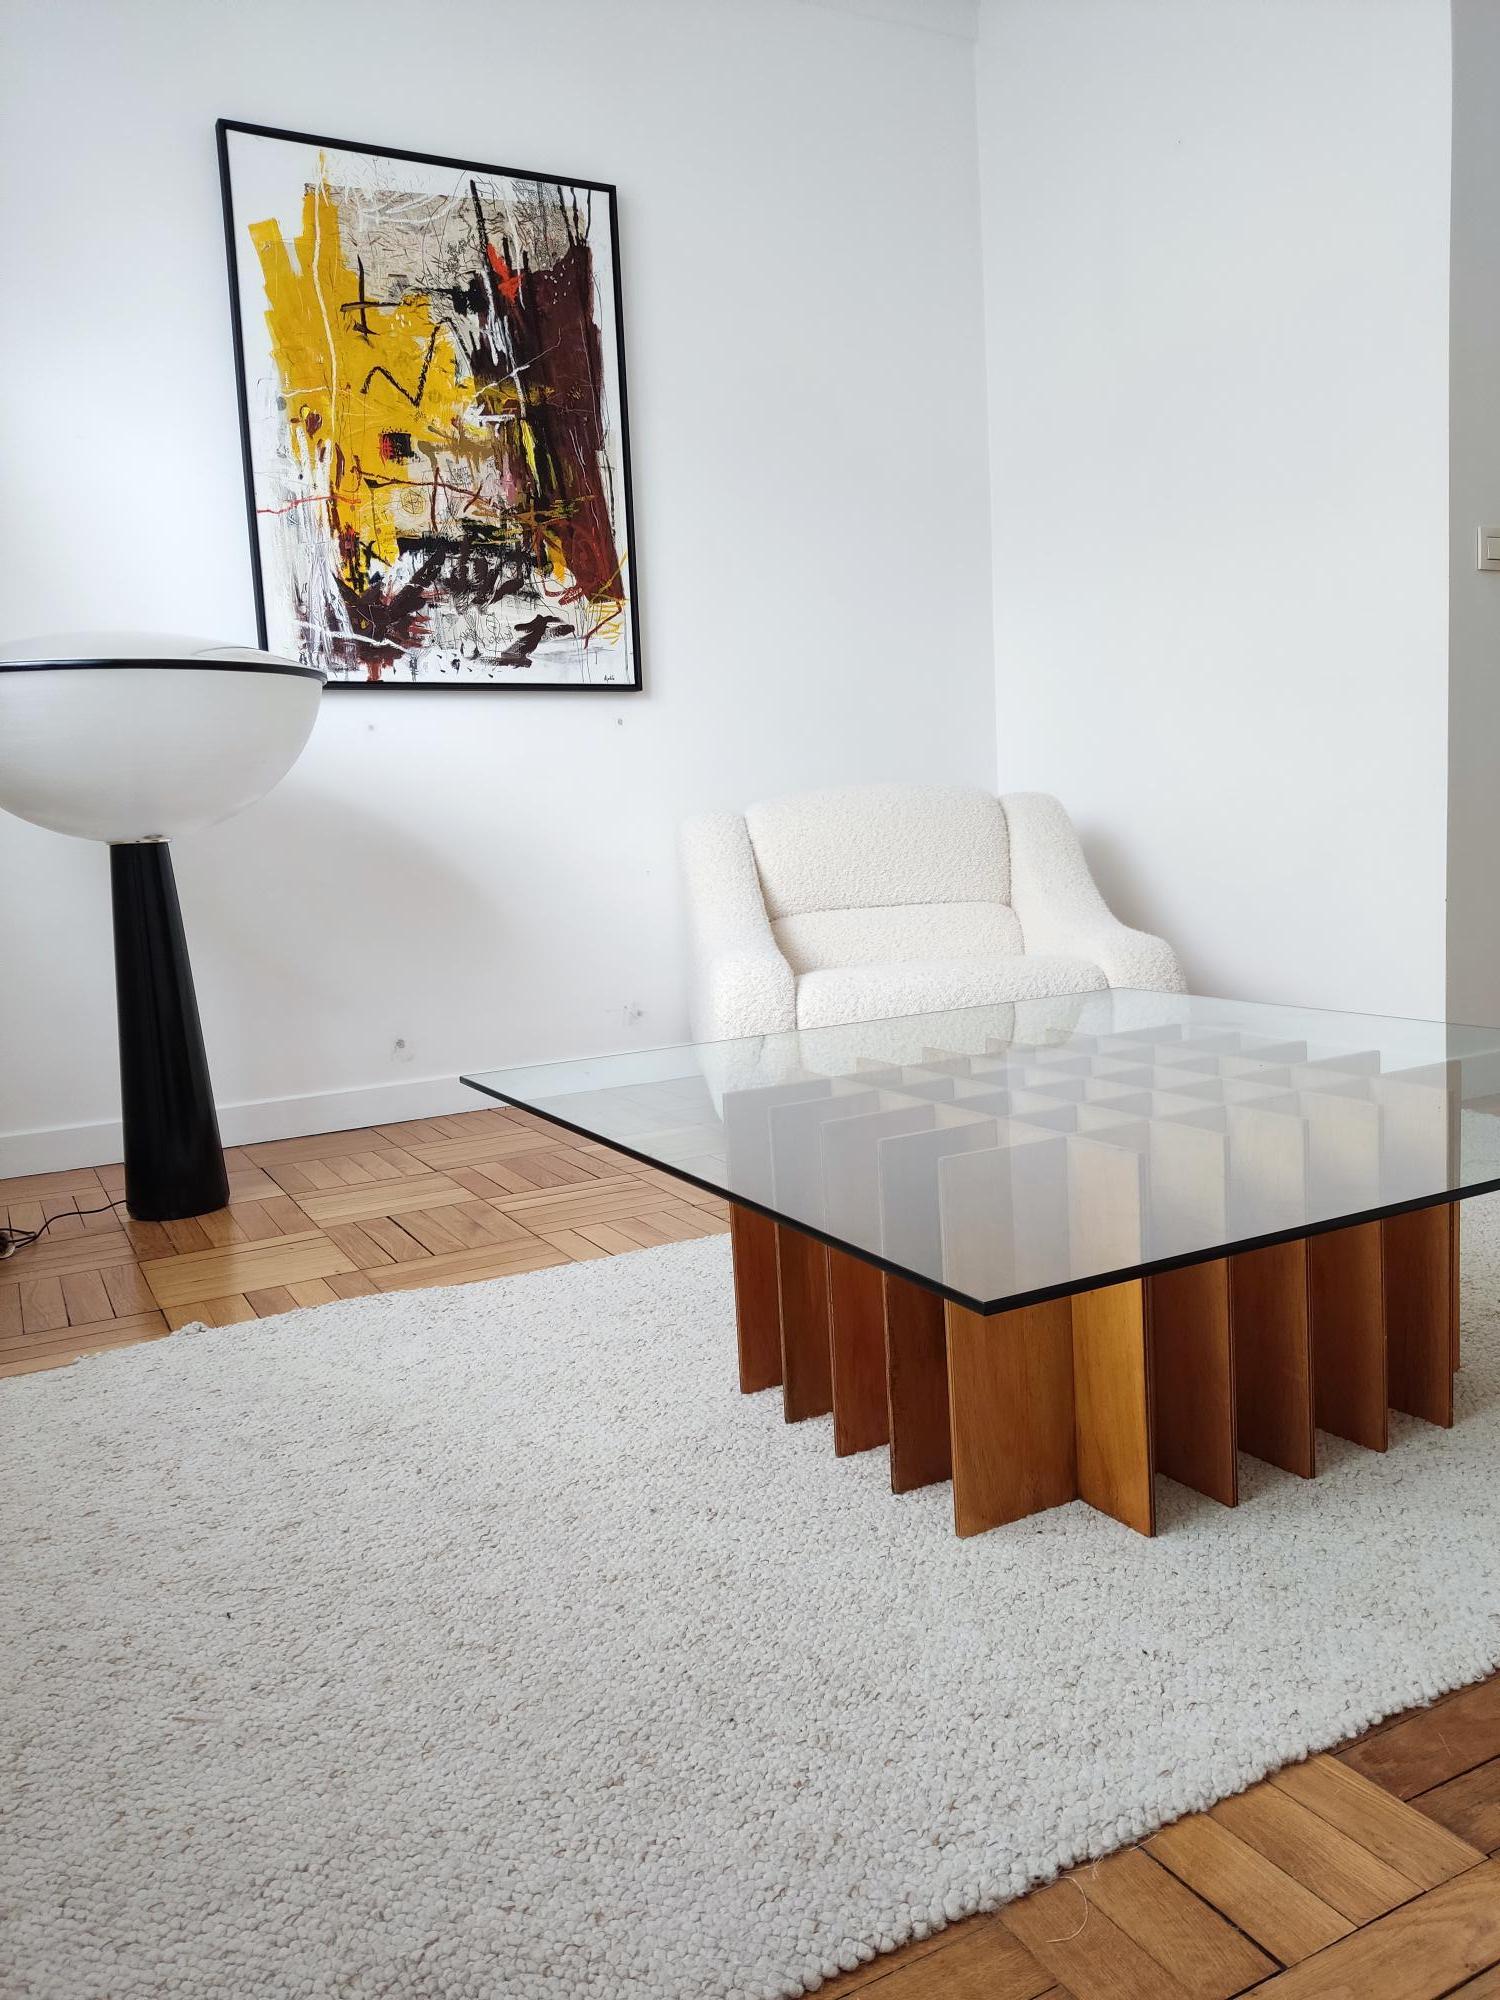 Squared wooden table 4